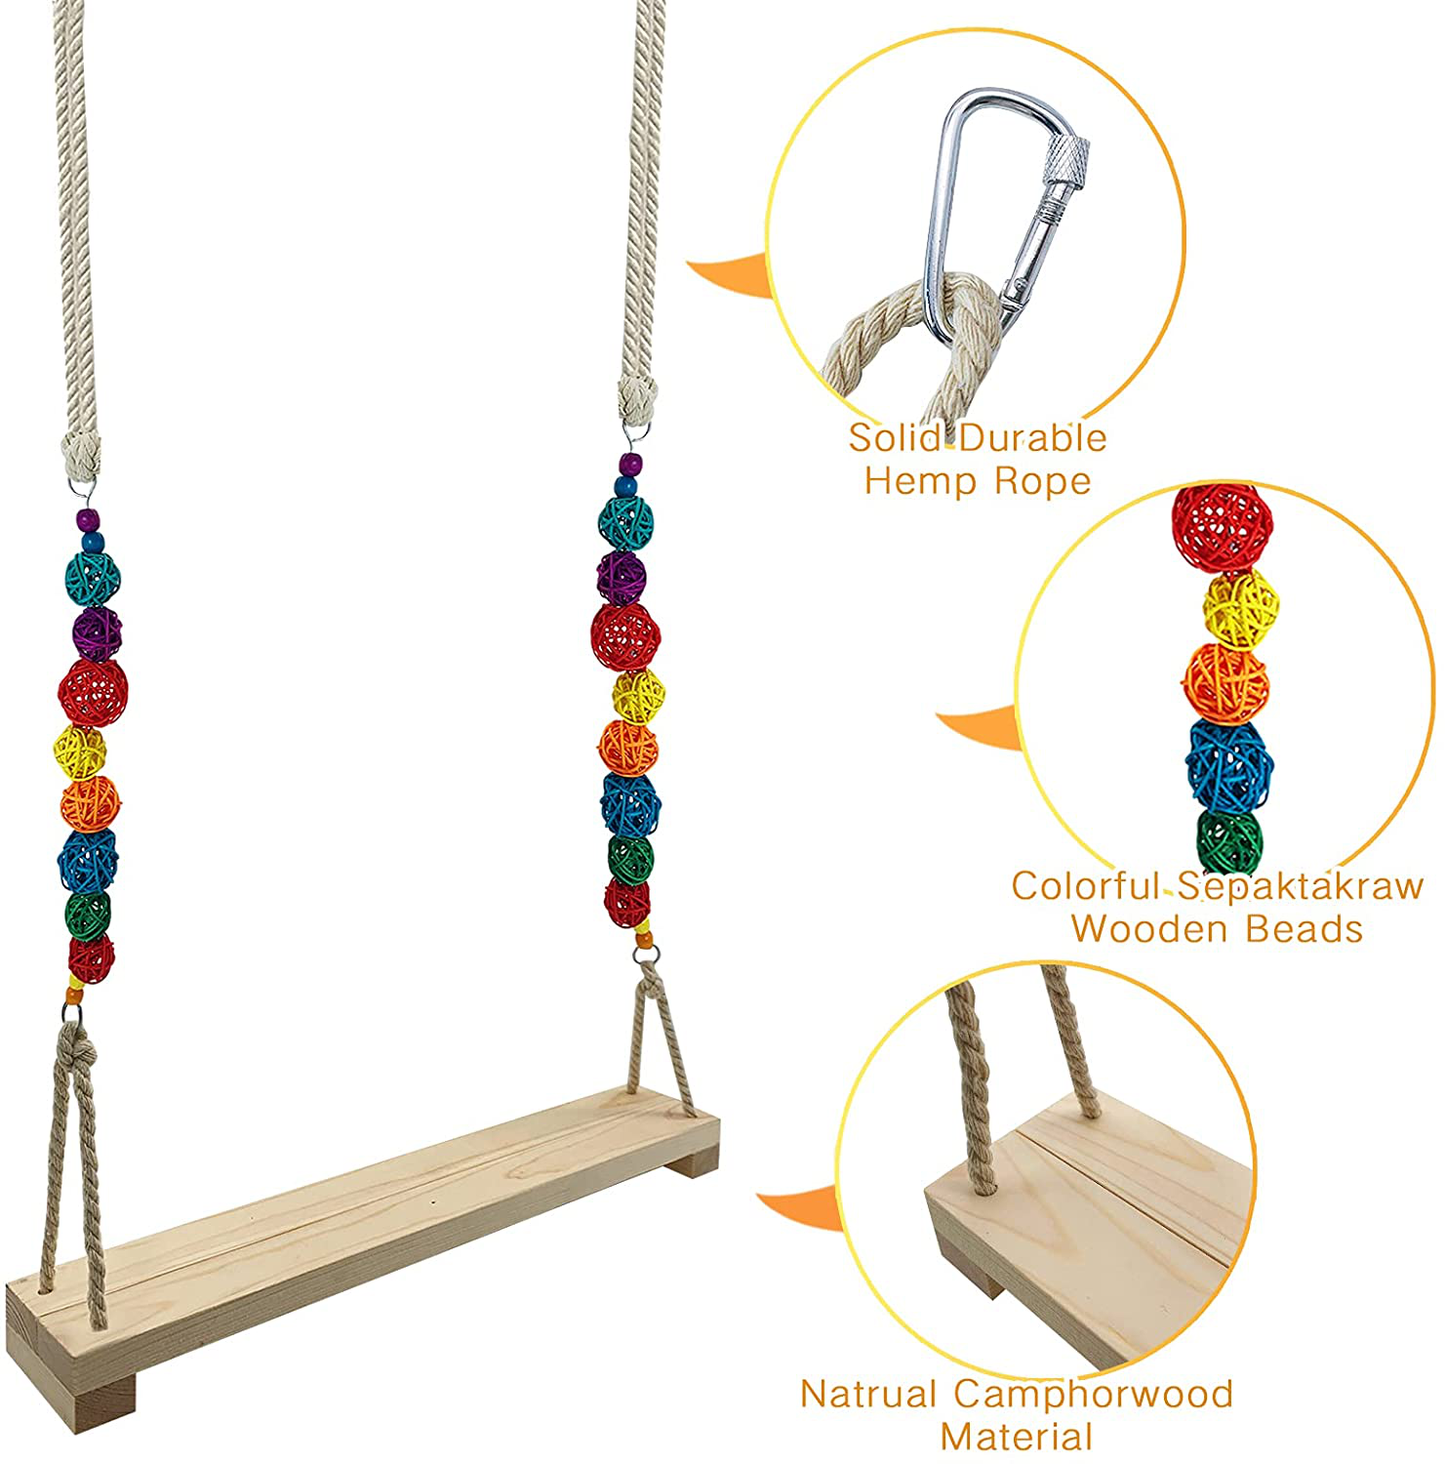 Chicken Swing,Chicken Perch,Wood Stand for Chick,Ladder Toys for Bird,Handmade Coop Swing for Chicken Bird,Parrot,Hens,Small Parakeets,Cockatiels,Macaws,Large Pet, Safe and Relief of Stress